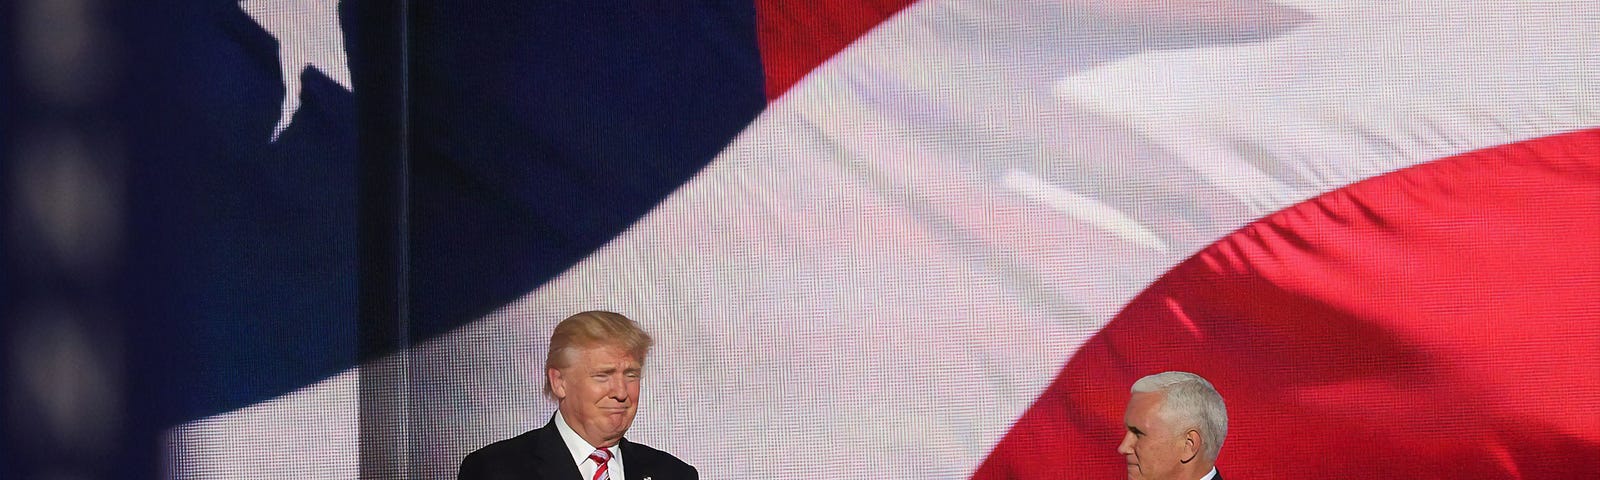 Trump and Pence on stage behind a HUGE U.S. flag